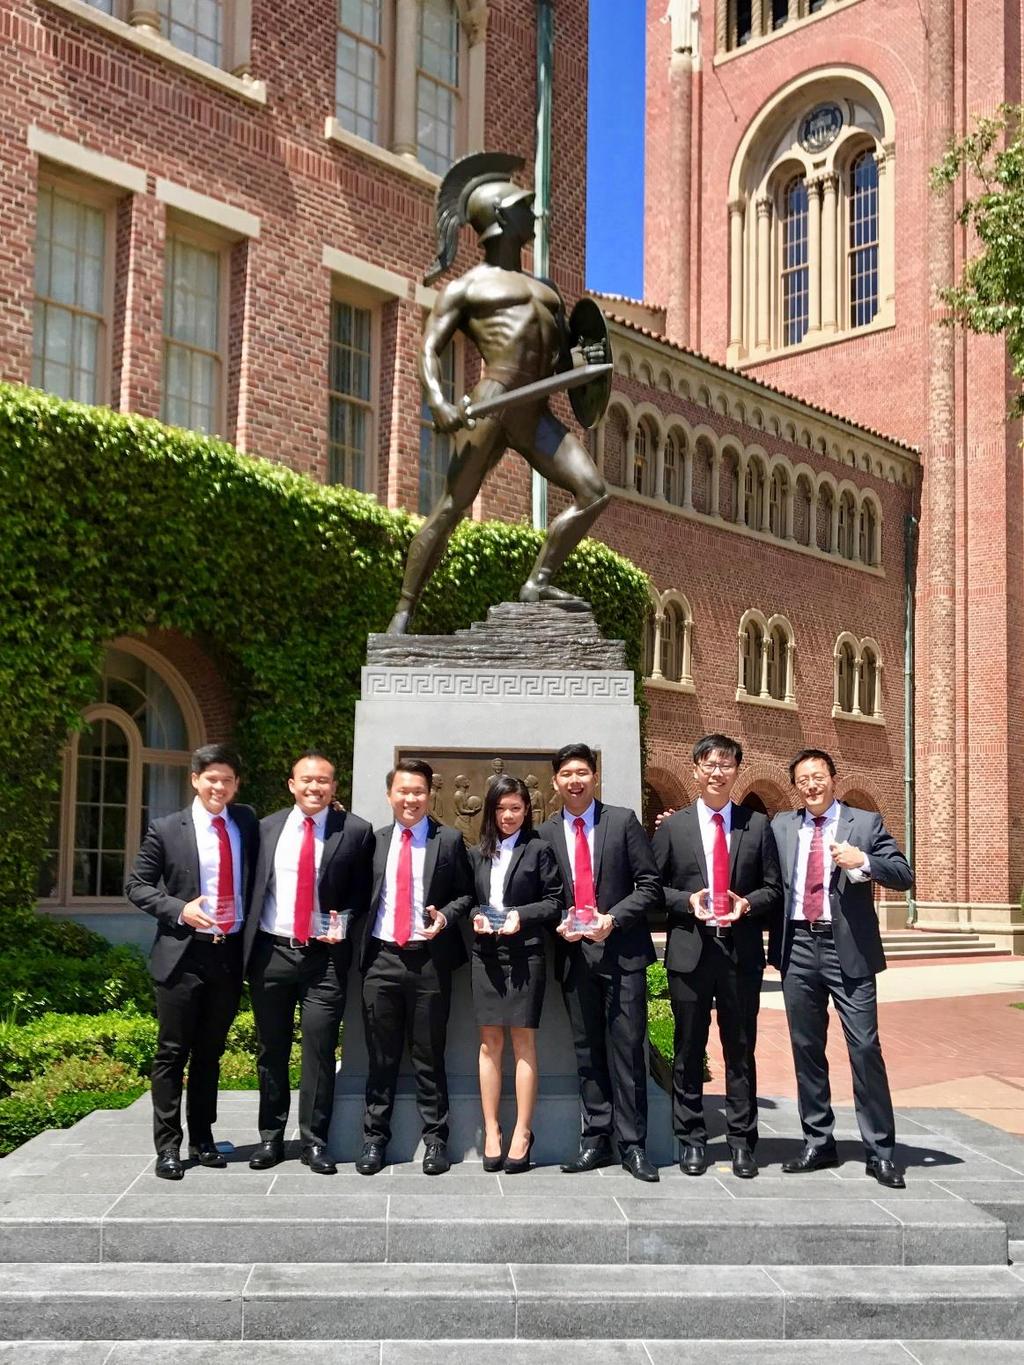 USC International Real Estate Competition 2017 Date: 17 April 2017 Our team of real estate undergraduates was awarded 3rd place at the annual USC International Real Estate Competition 2017